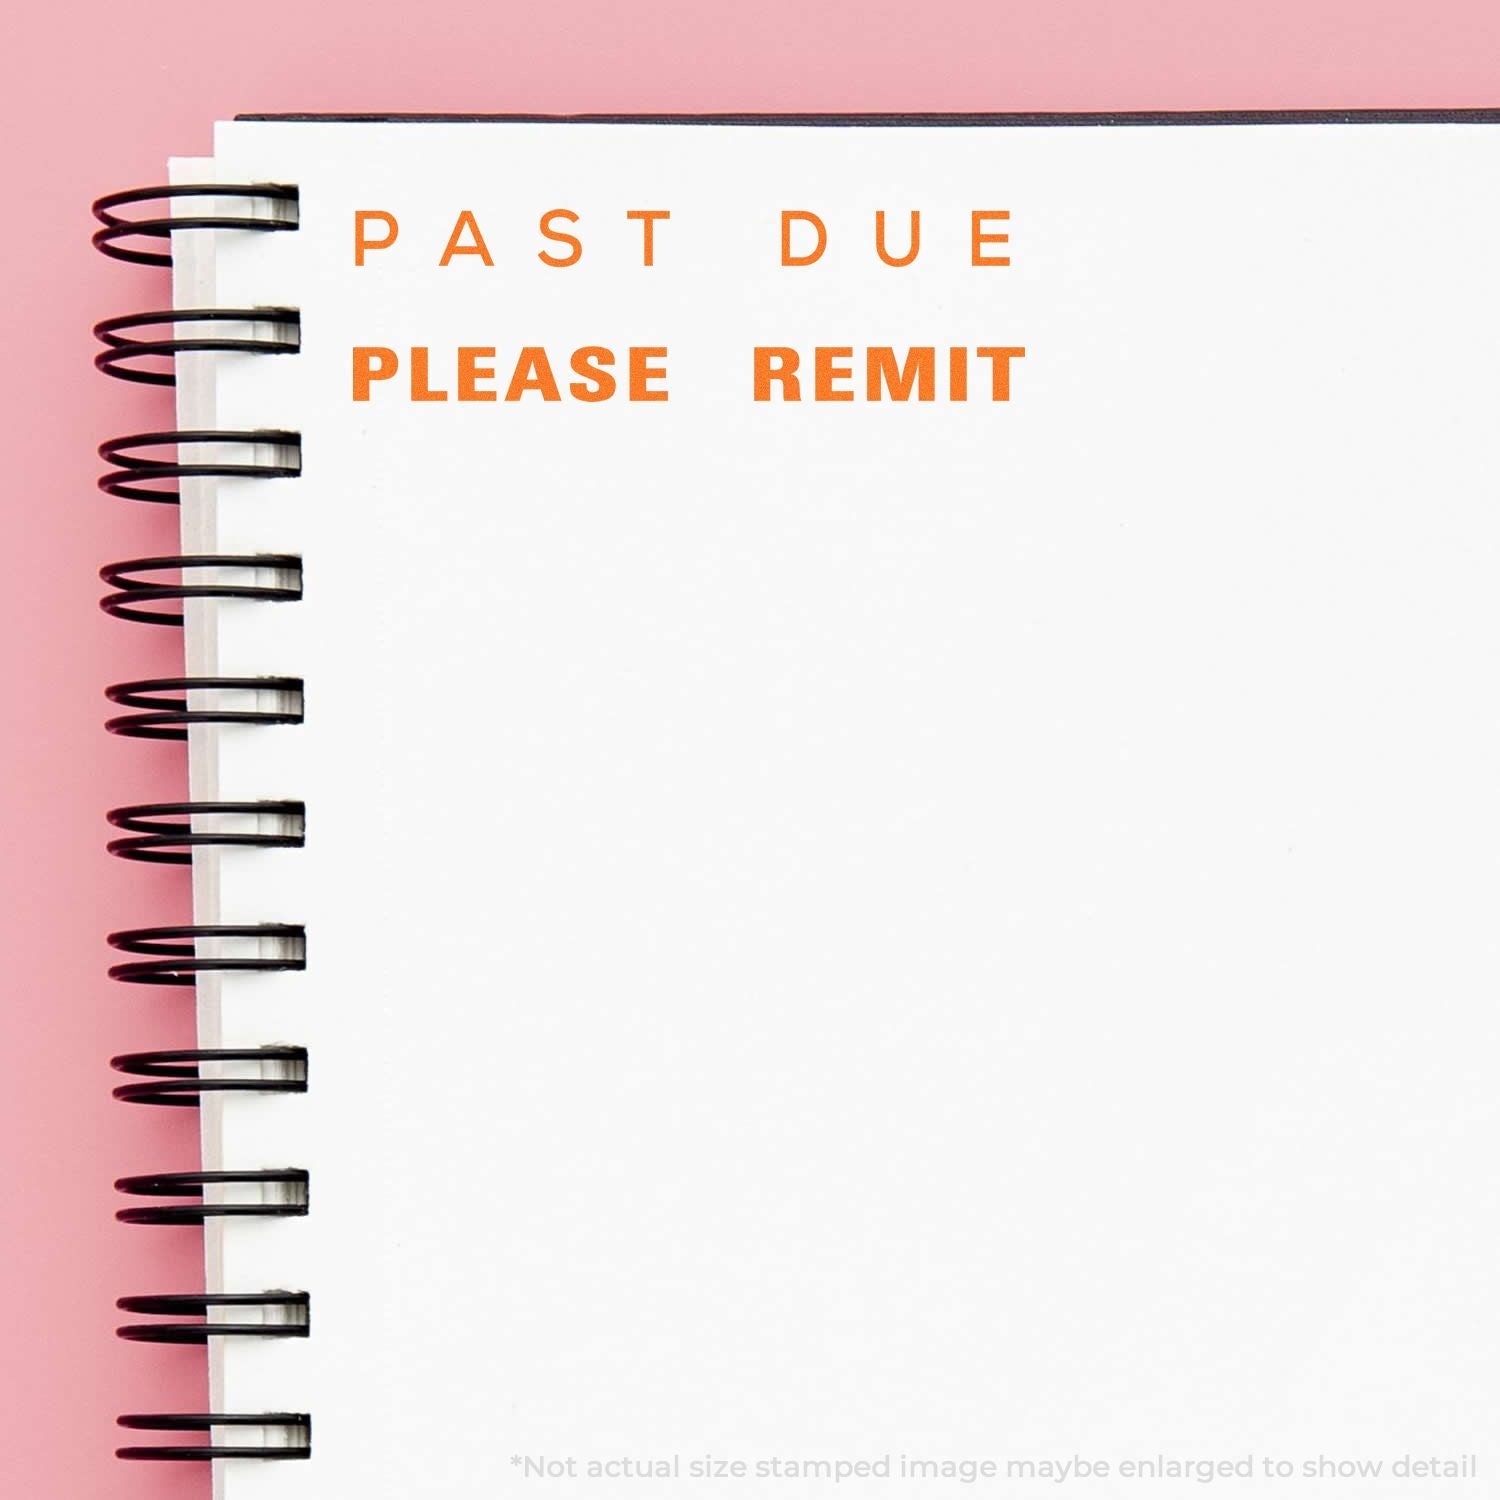 A self-inking stamp with a stamped image showing how the text "PAST DUE PLEASE REMIT" ("PAST DUE" in a narrow font and "PLEASE REMIT" in bold font) is displayed after stamping.